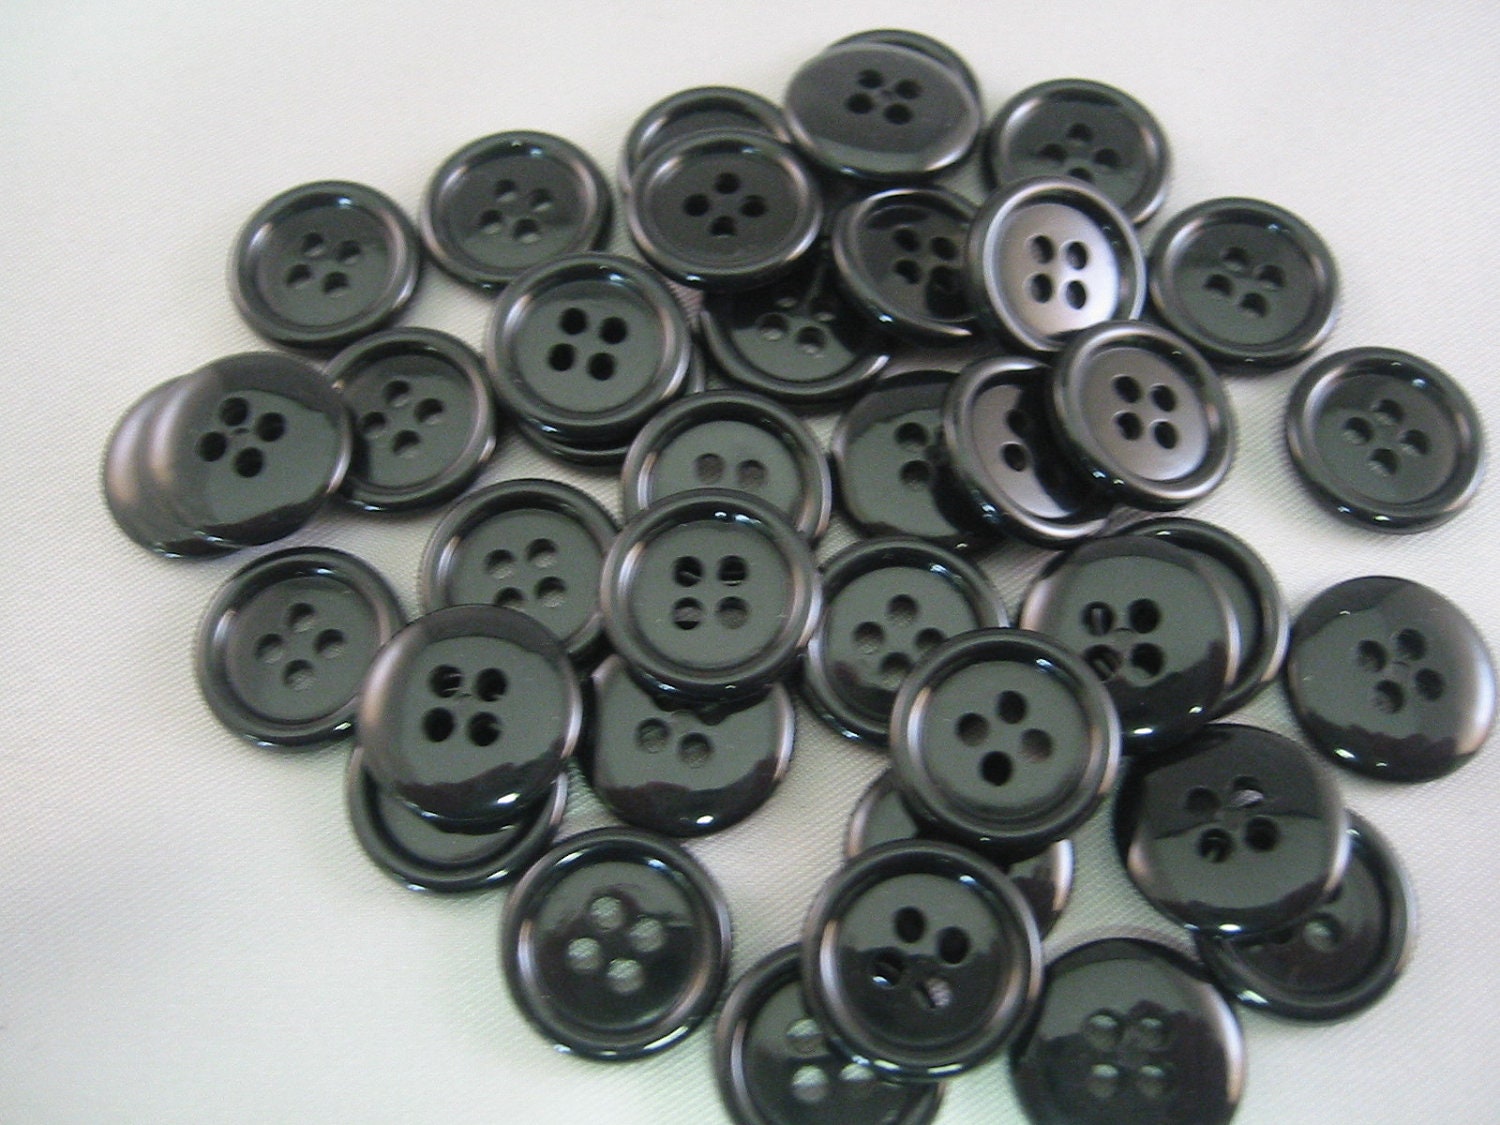 Pearlized Buttons, SIZE 5/16 9 Mm. 1/2 Ball Pearl Buttons With Wire Shank,  , Lots of 100-50-25-10 Pick QTY at Check Out. 